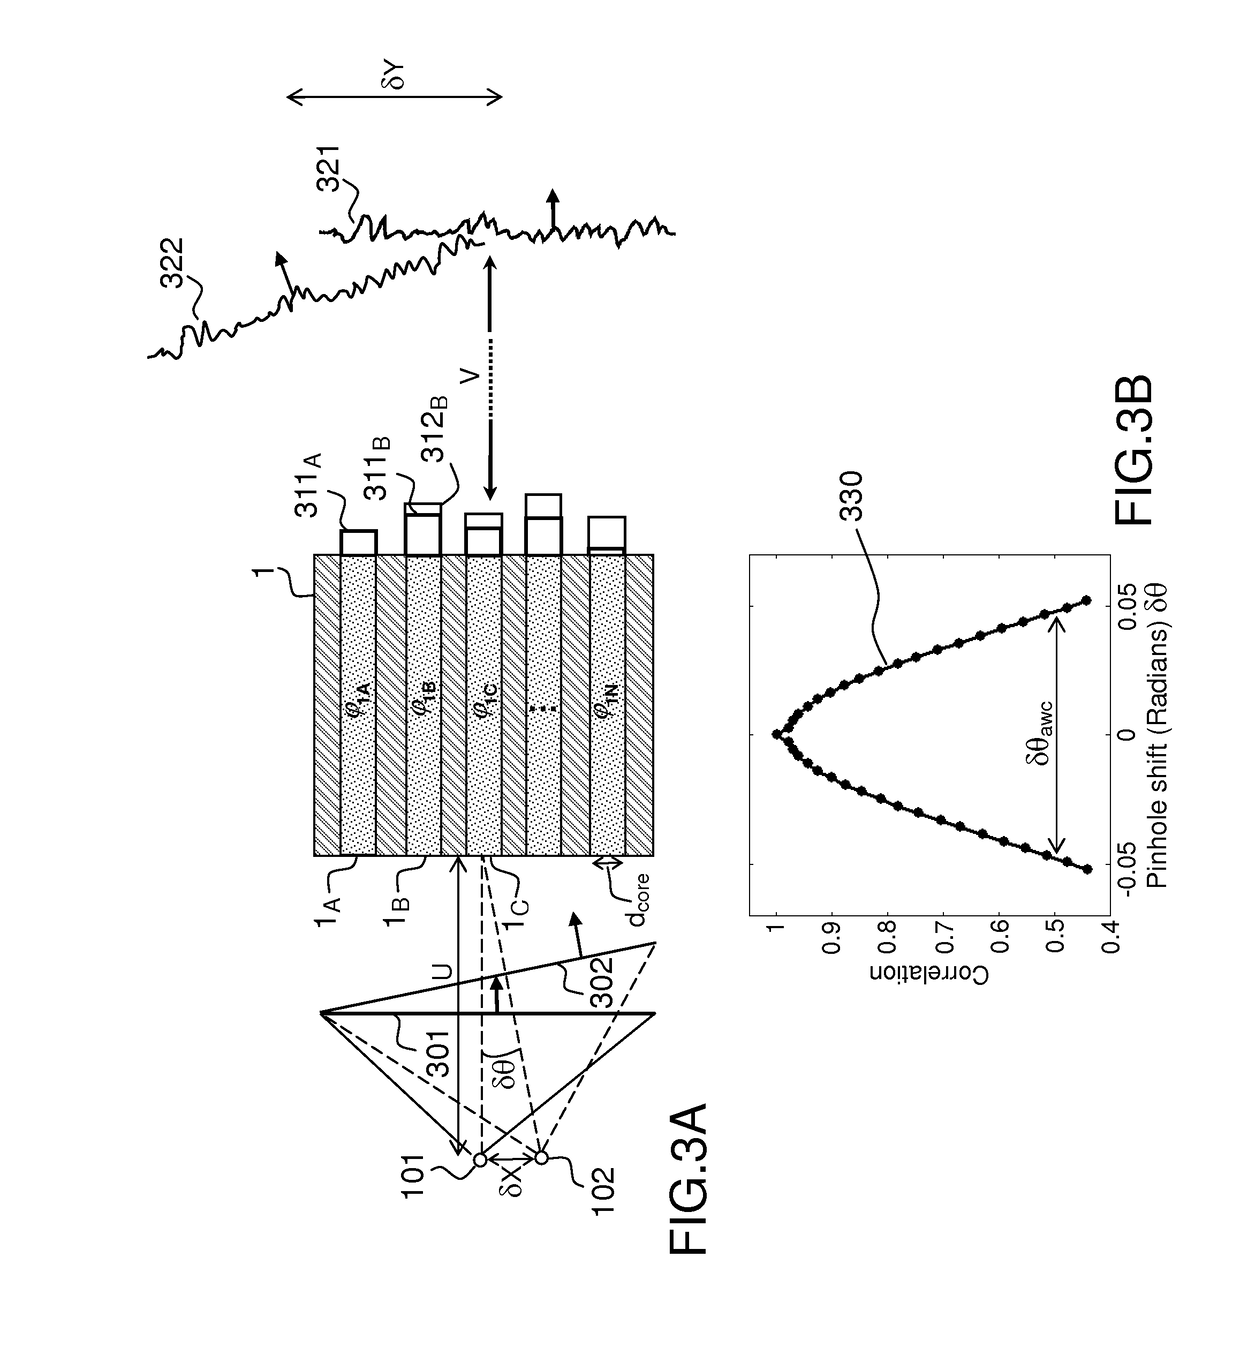 Systems and methods for high resolution imaging using a bundle of optical fibers